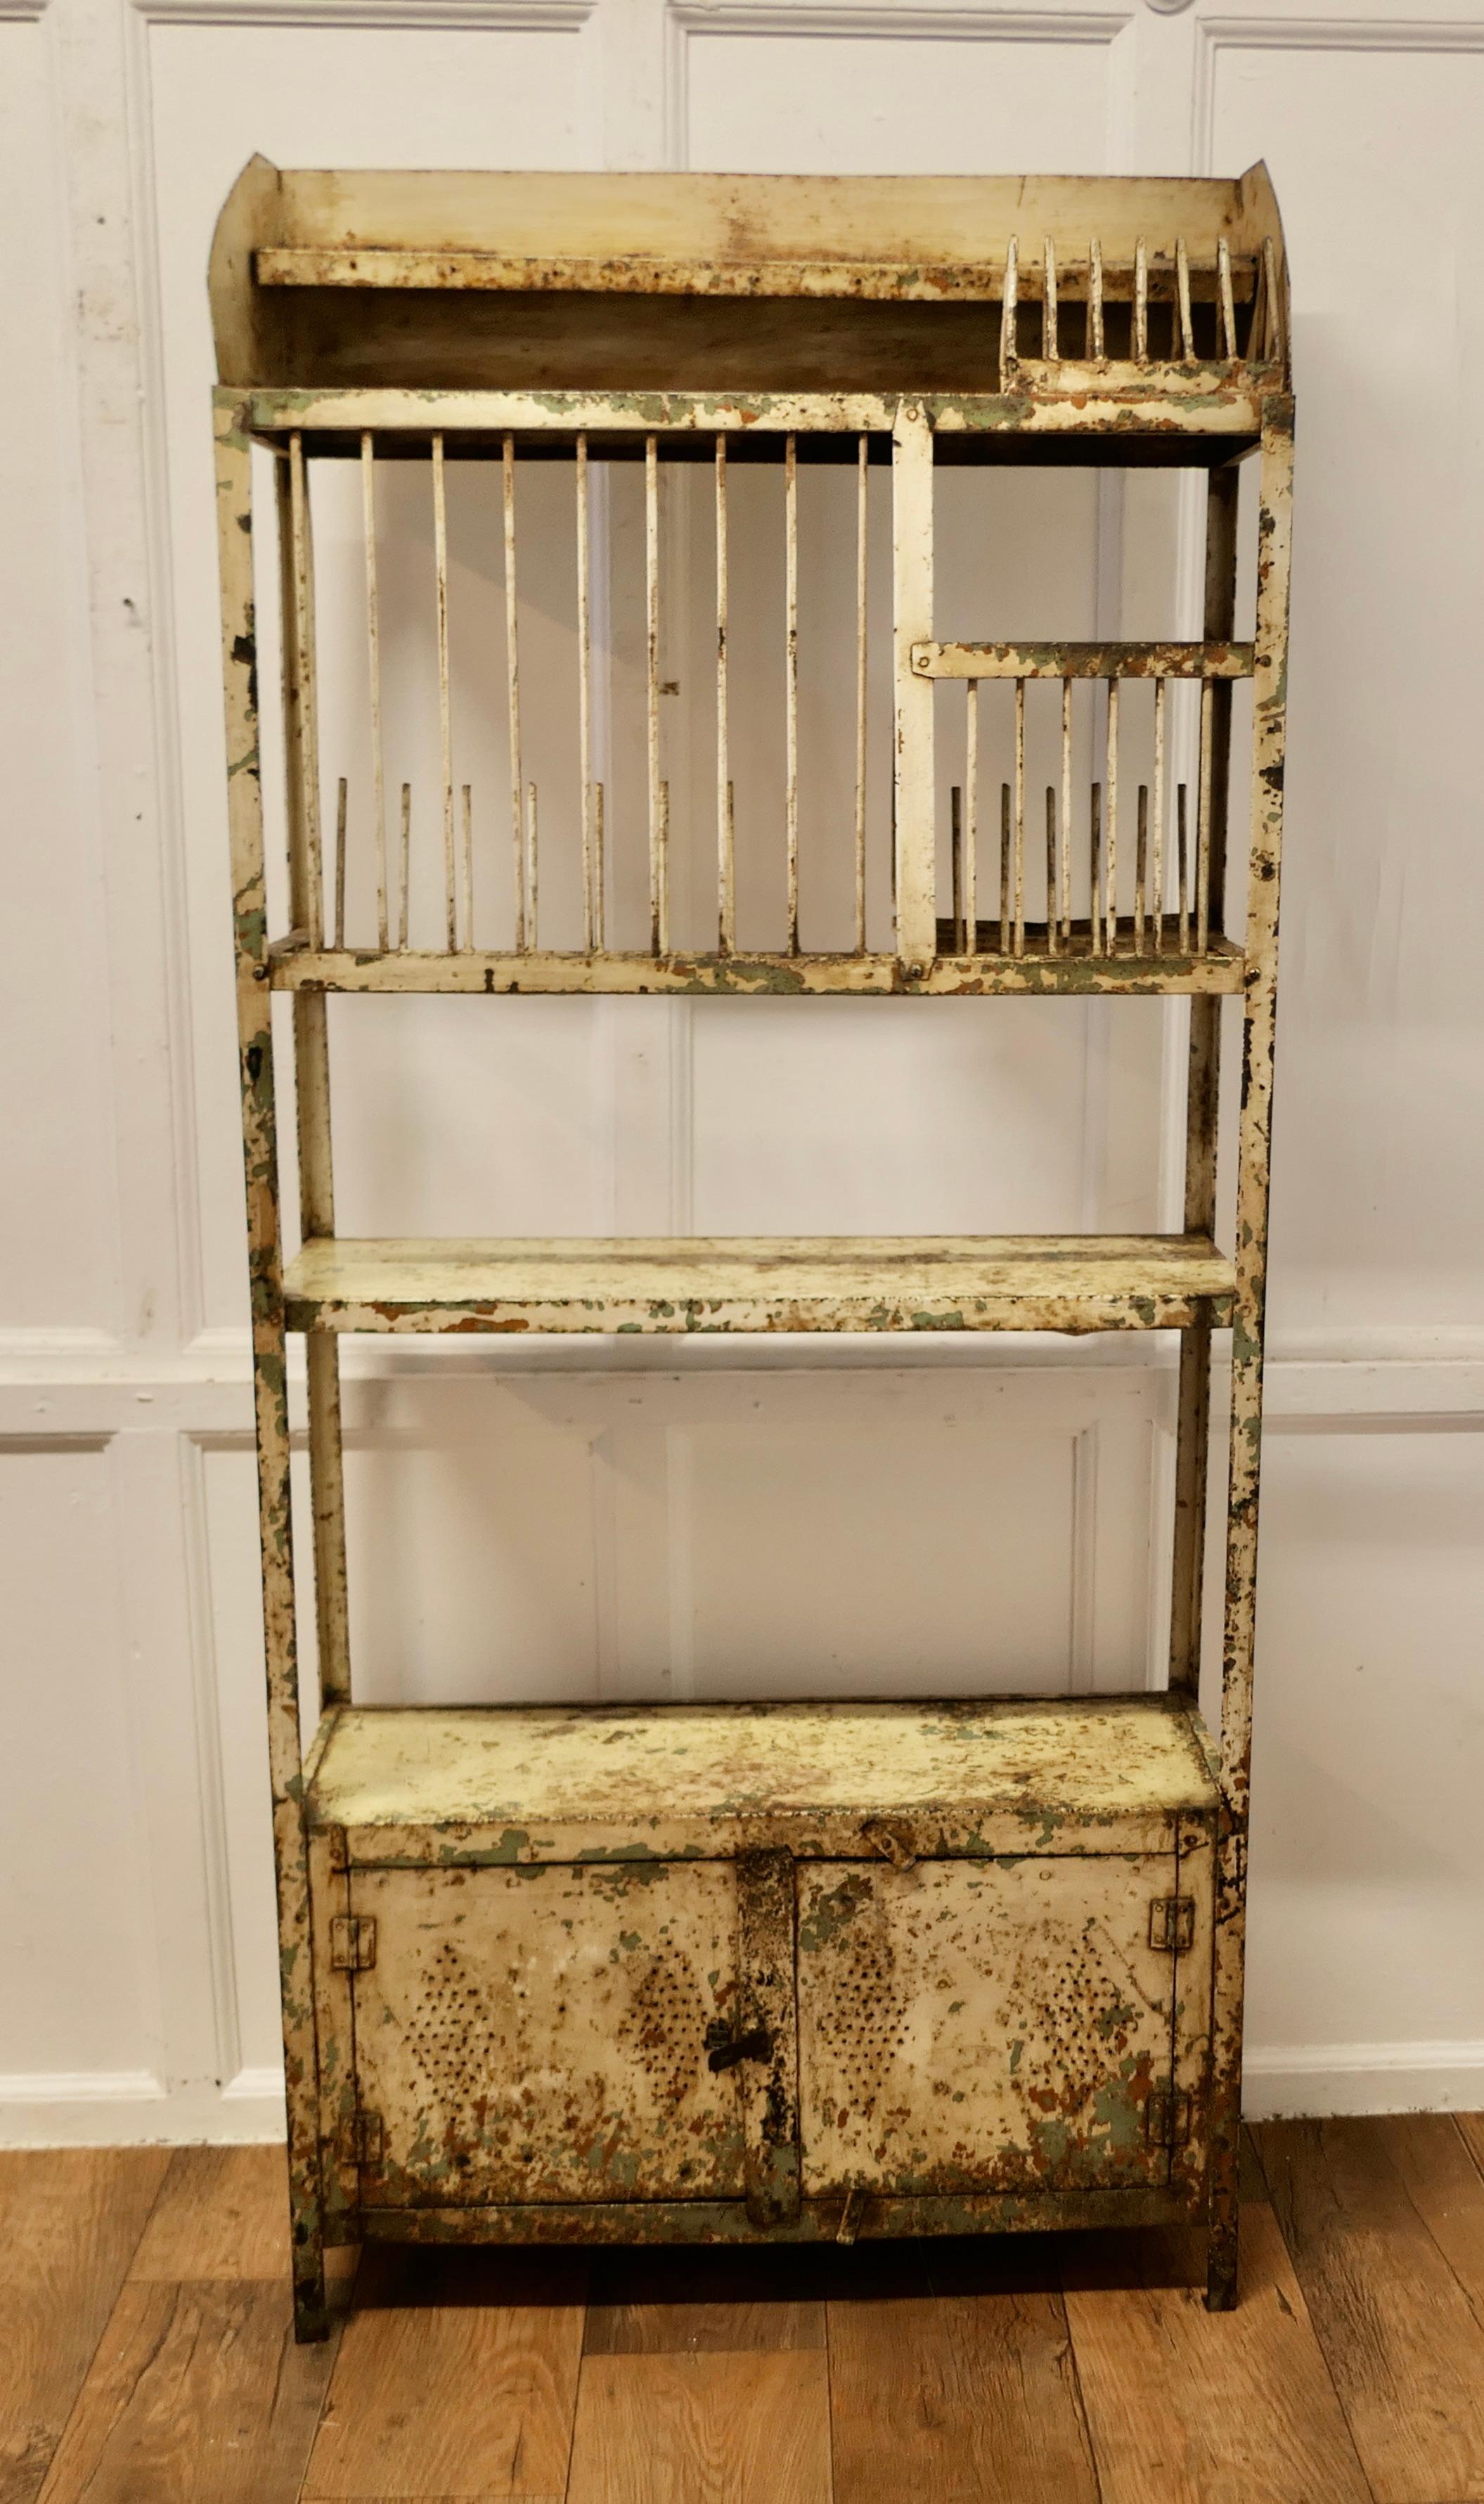 Old French Distressed Metal Field Kitchen Dresser, Drainer

Discovered in an old Barn, the dresser was used during the harvest time when there were many more workers to feed
The unit is made entirely with metal the patina is distressed but the